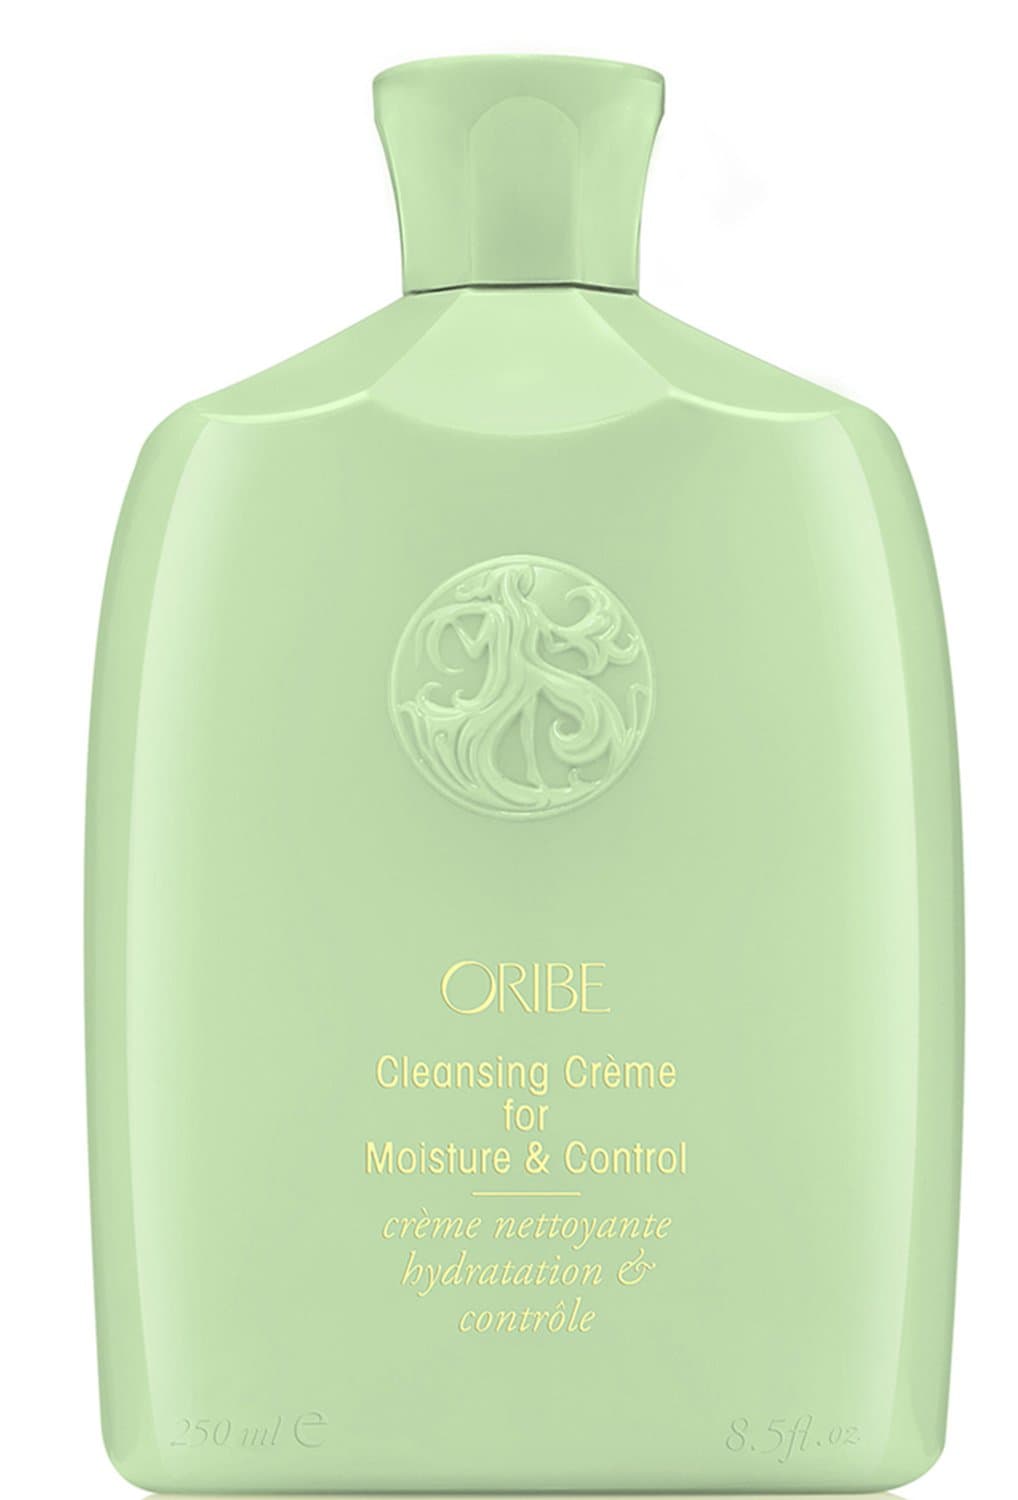 Cleansing Creme for Moisture & Control 250ml | Oribe 